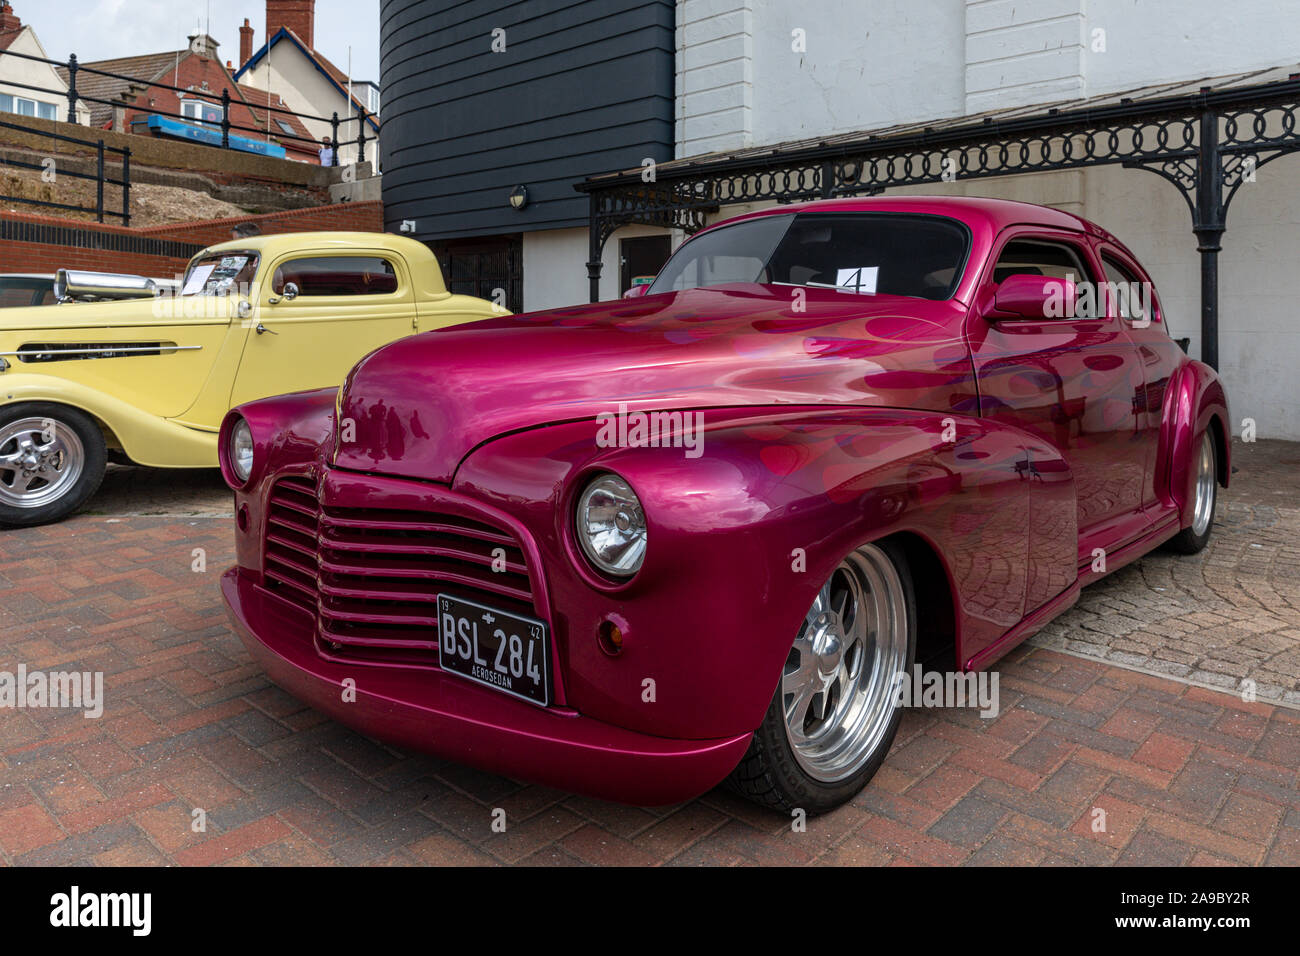 An American 1942 Chevrolet GMC custom car at 'Race the Waves' event, where cars and motorcycles drag race on the beach at Bridlington, East Yorkshire Stock Photo